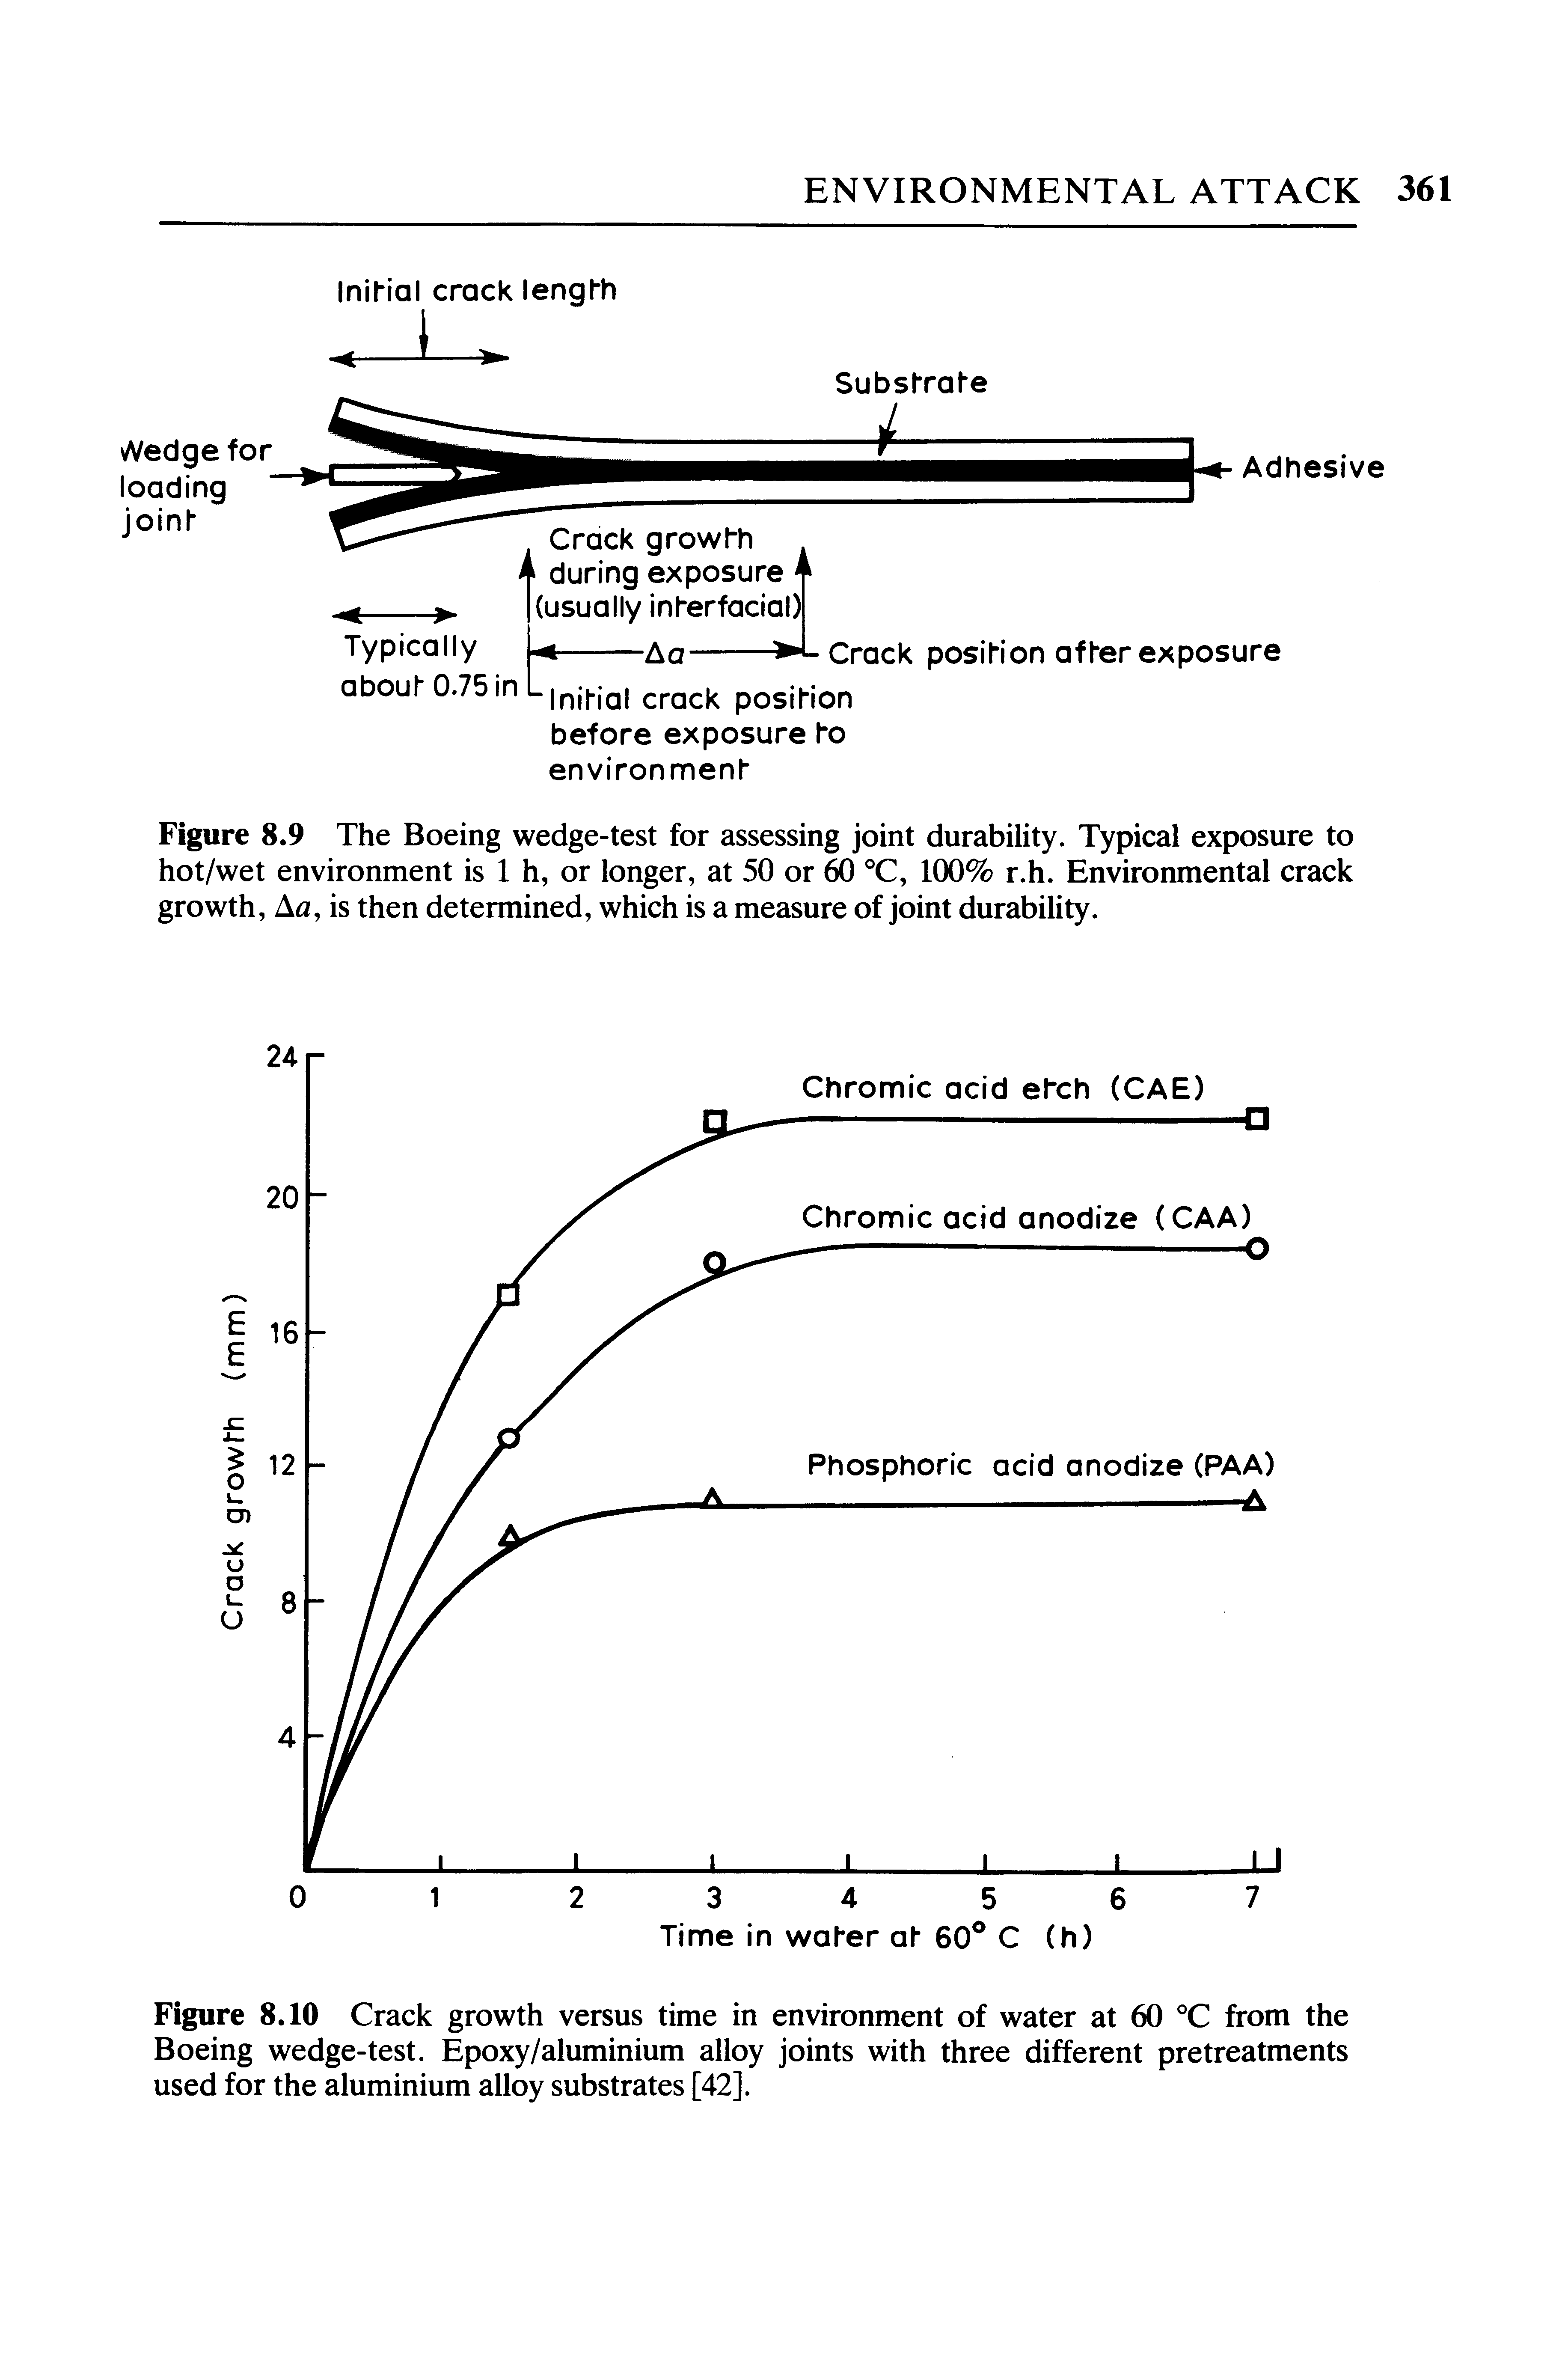 Figure 8.10 Crack growth versus time in environment of water at 60 from the Boeing wedge-test. Epoxy/aluminium alloy joints with three different pretreatments used for the aluminium alloy substrates [42].